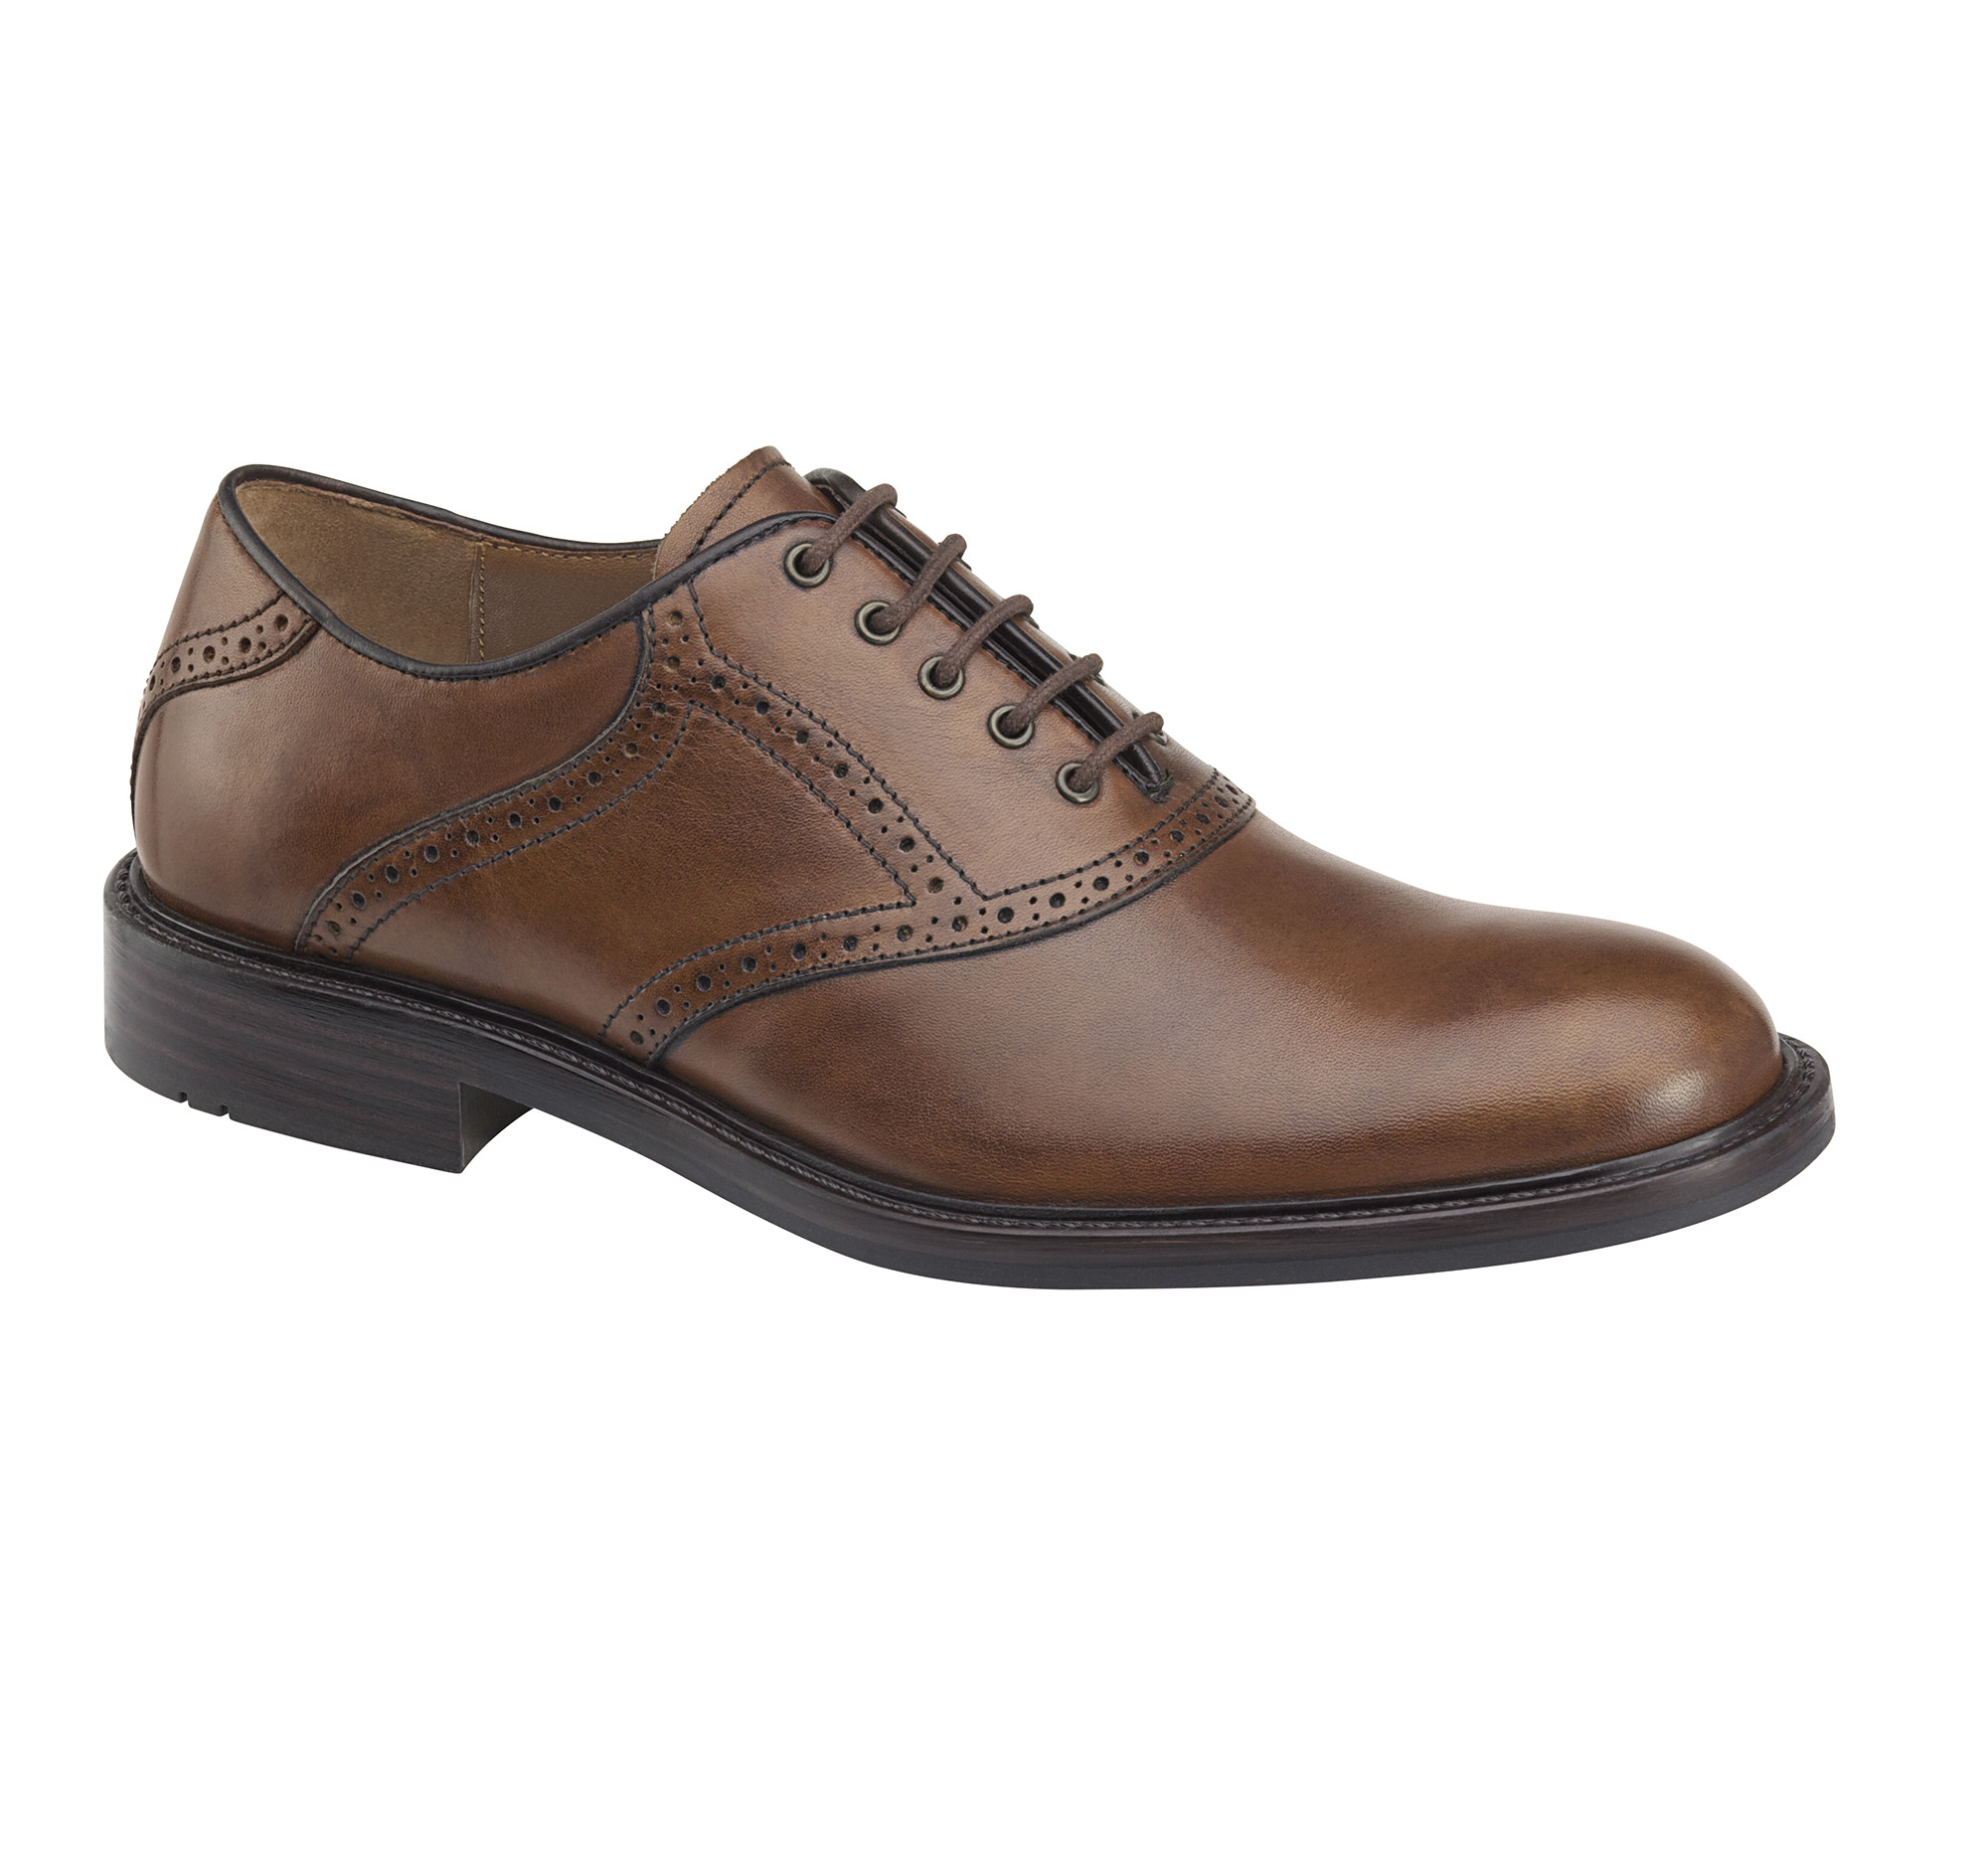 johnston and murphy mens saddle shoes